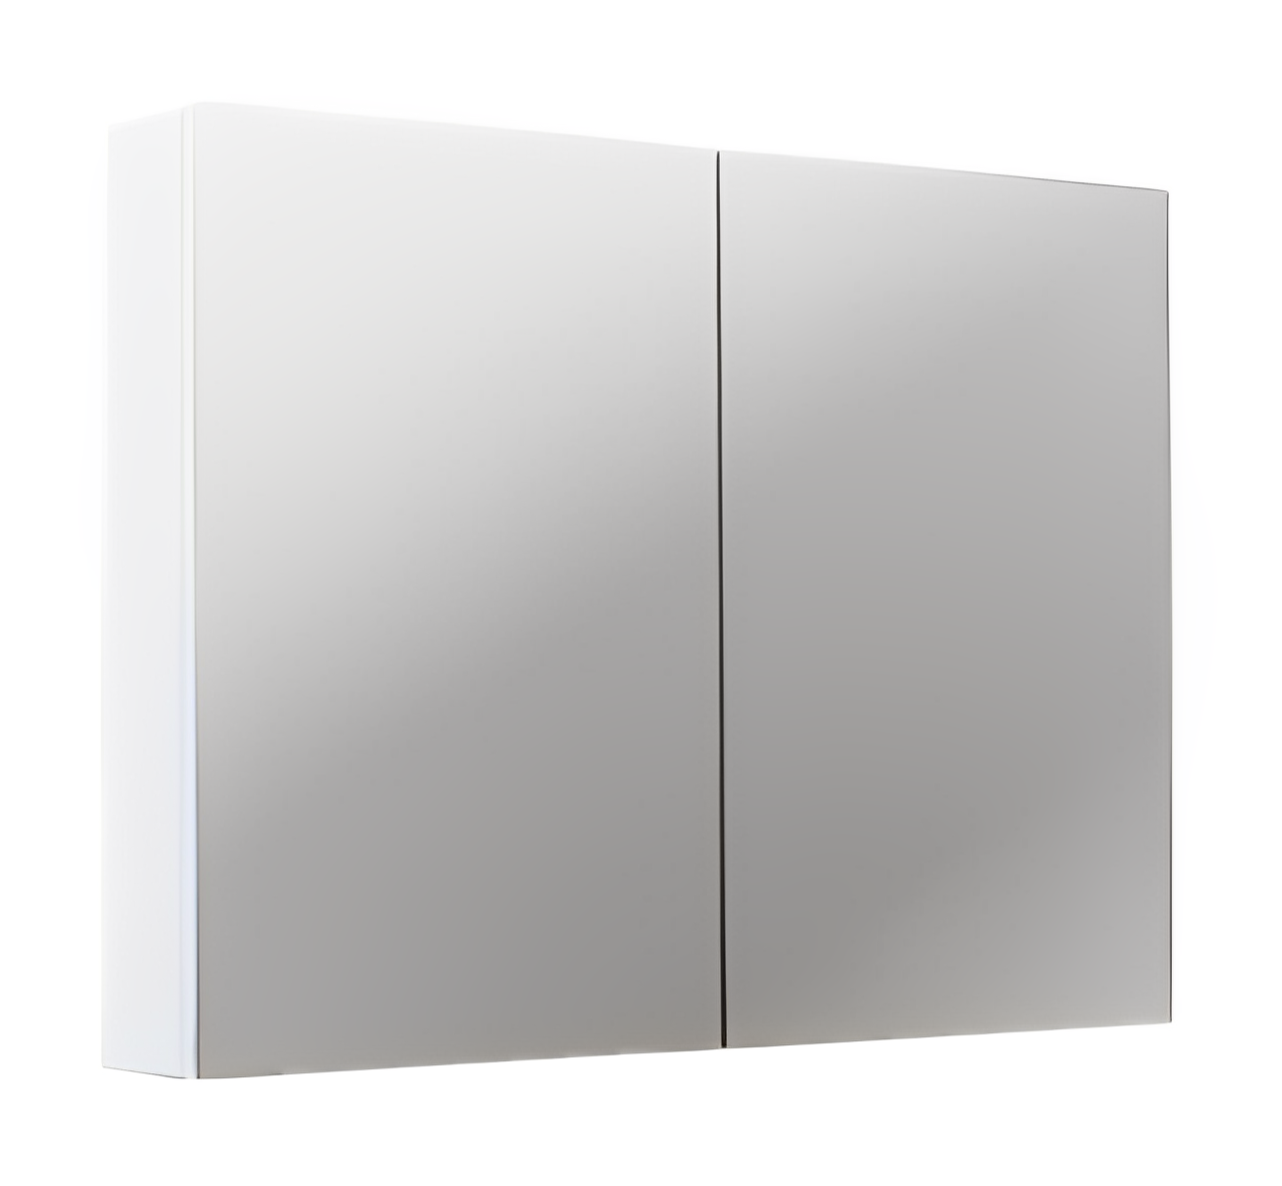 POSEIDON MPSV MIRROR CABINET (AVAILABLE IN 600MM, 750MM AND 900MM)